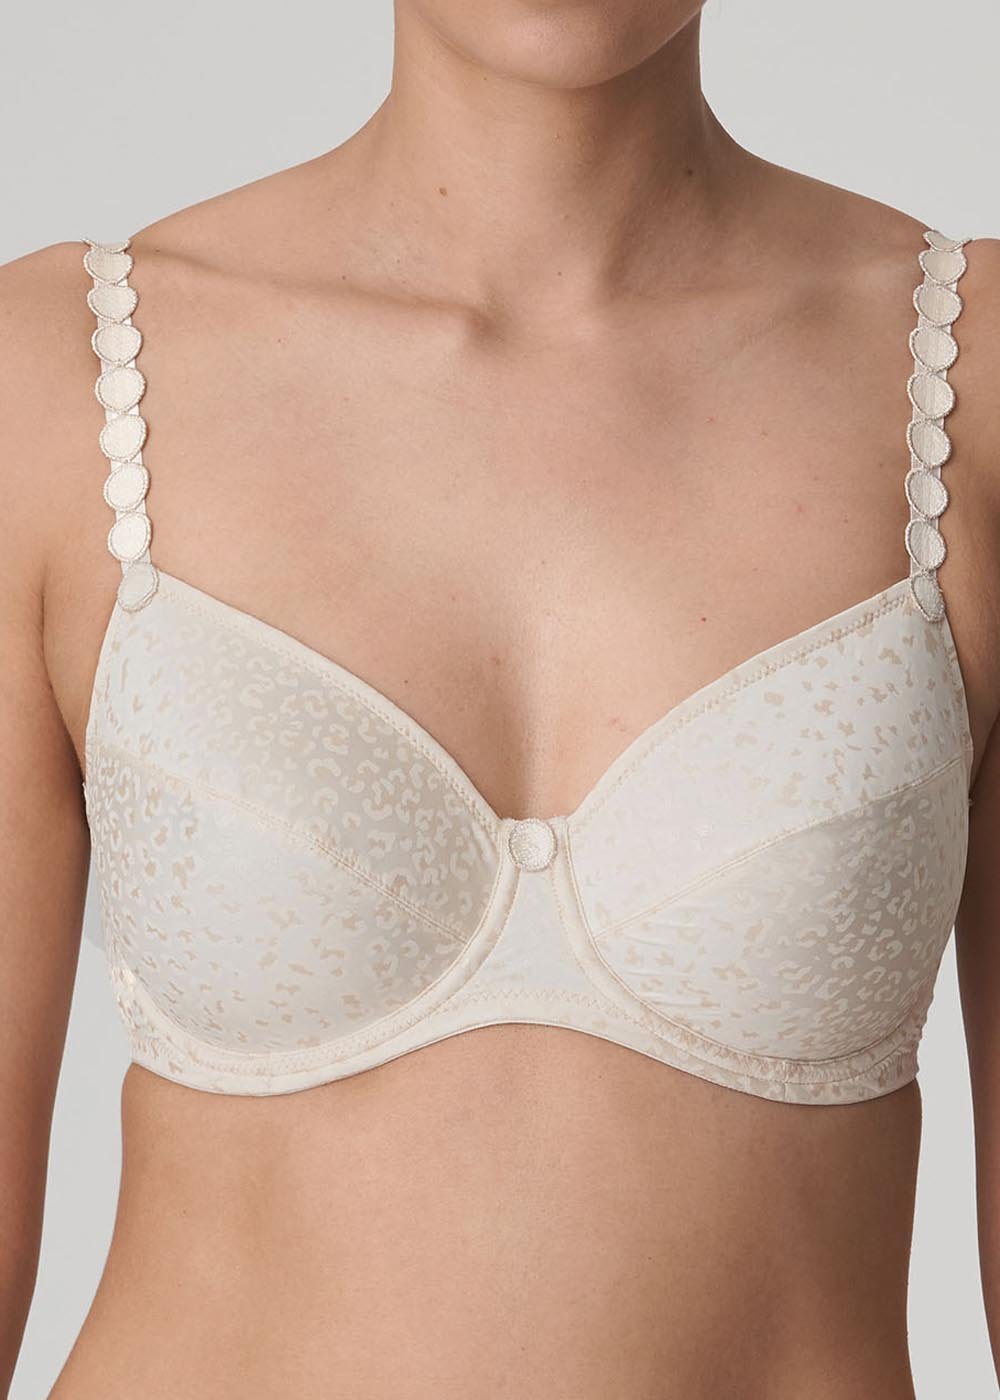 Soutien-gorge Emboitant Armatures Marie Jo l'Aventure Pearled Ivory